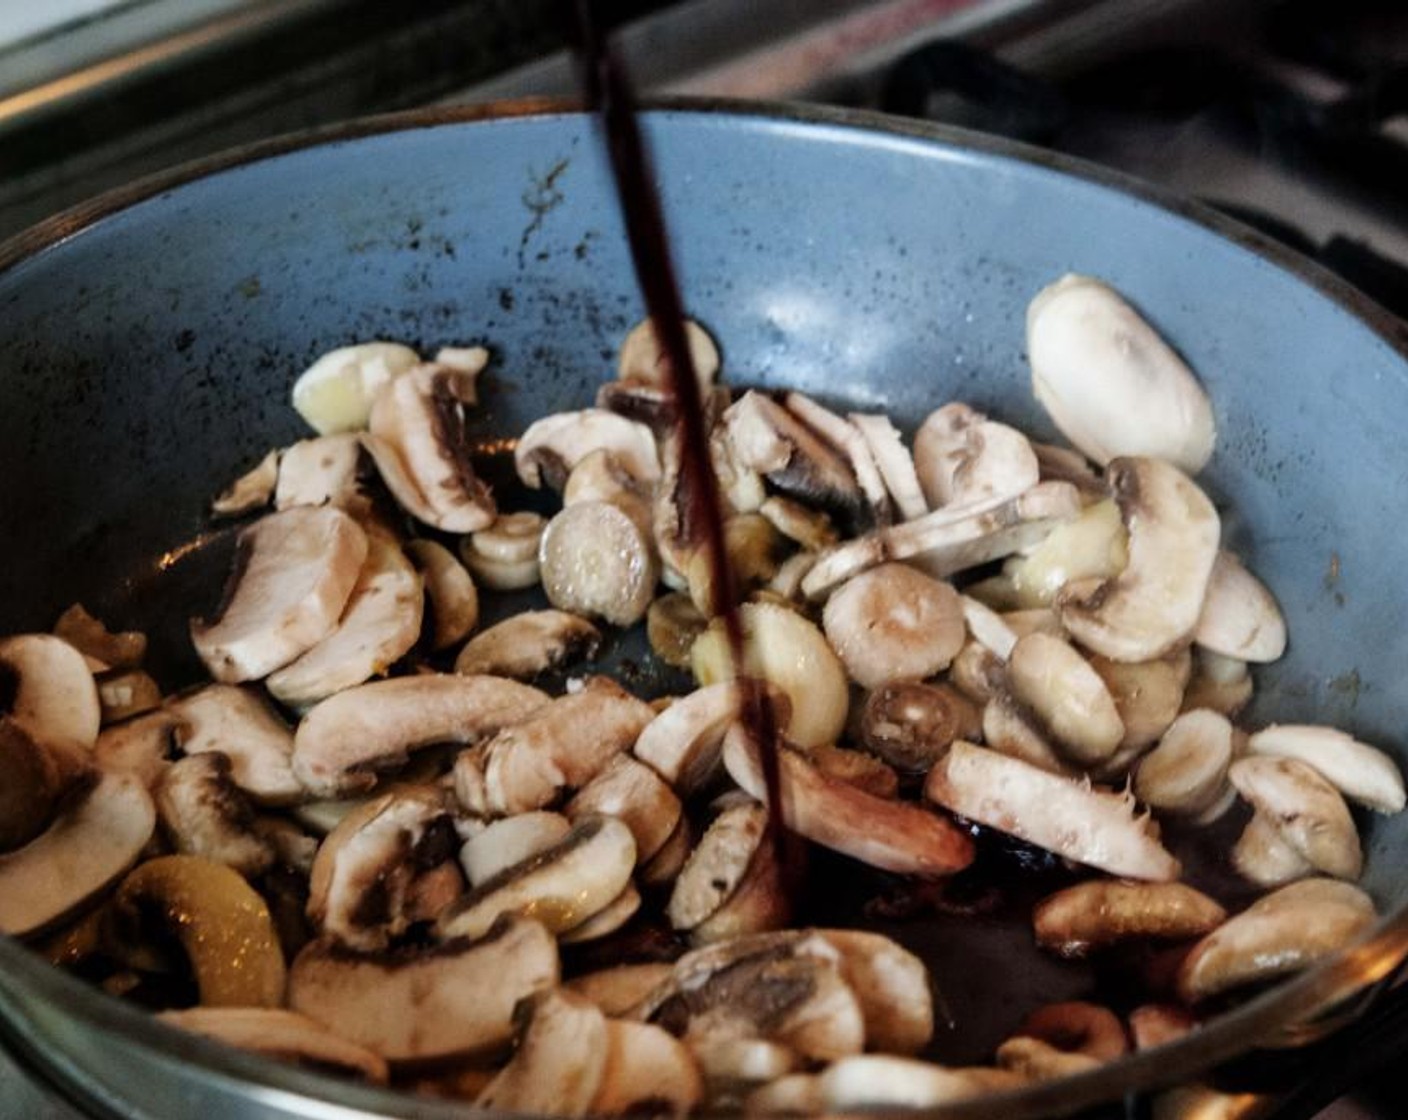 step 3 In a skillet heat up one of the Garlic (1 clove) and Extra-Virgin Olive Oil (2 Tbsp). Add the mushrooms and season with Salt (to taste) and Ground Black Pepper (to taste) and pour in the Red Wine (1/2 cup).